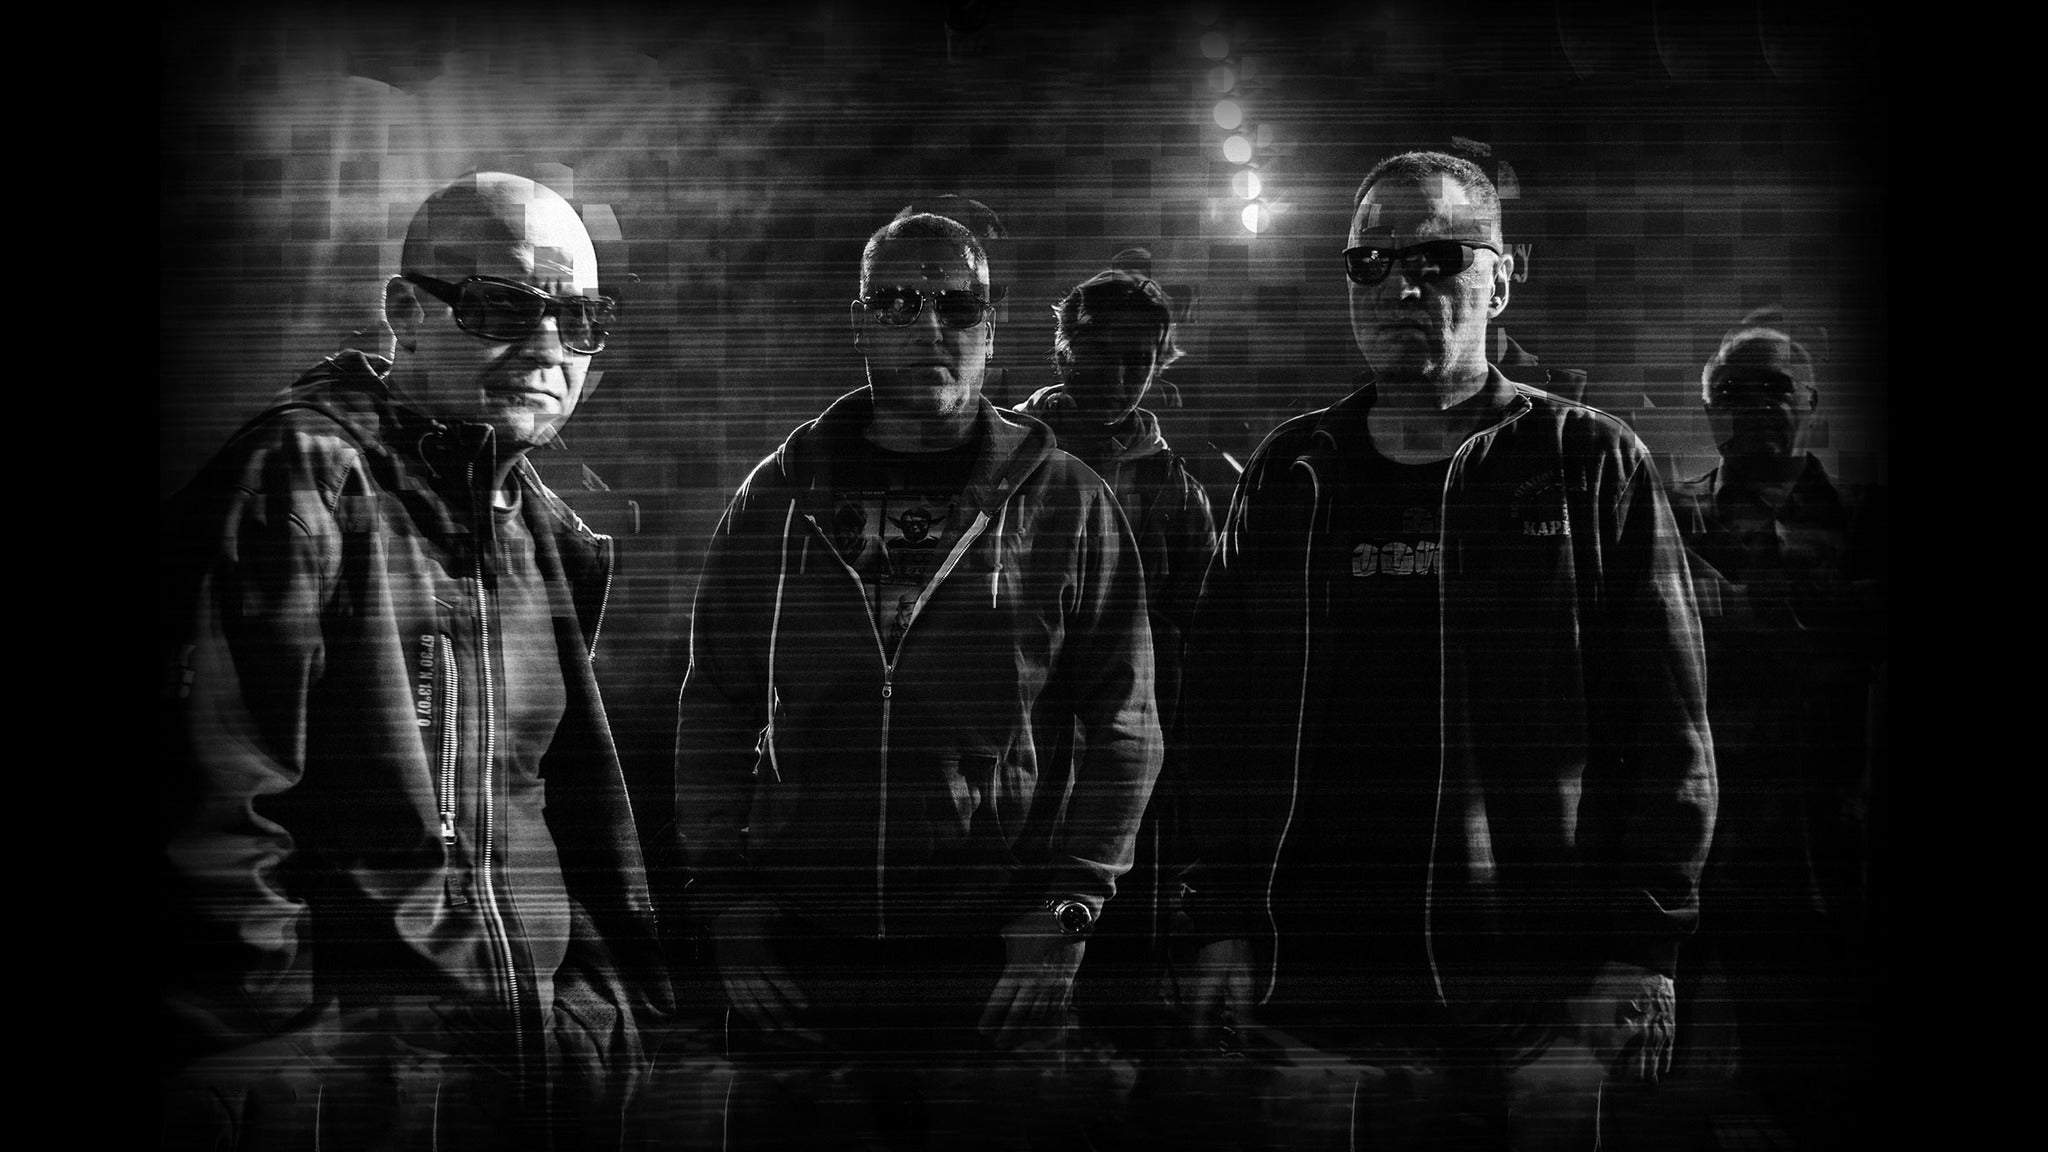 Front 242 with special guests Severed Heads in New York promo photo for Music Geeks presale offer code